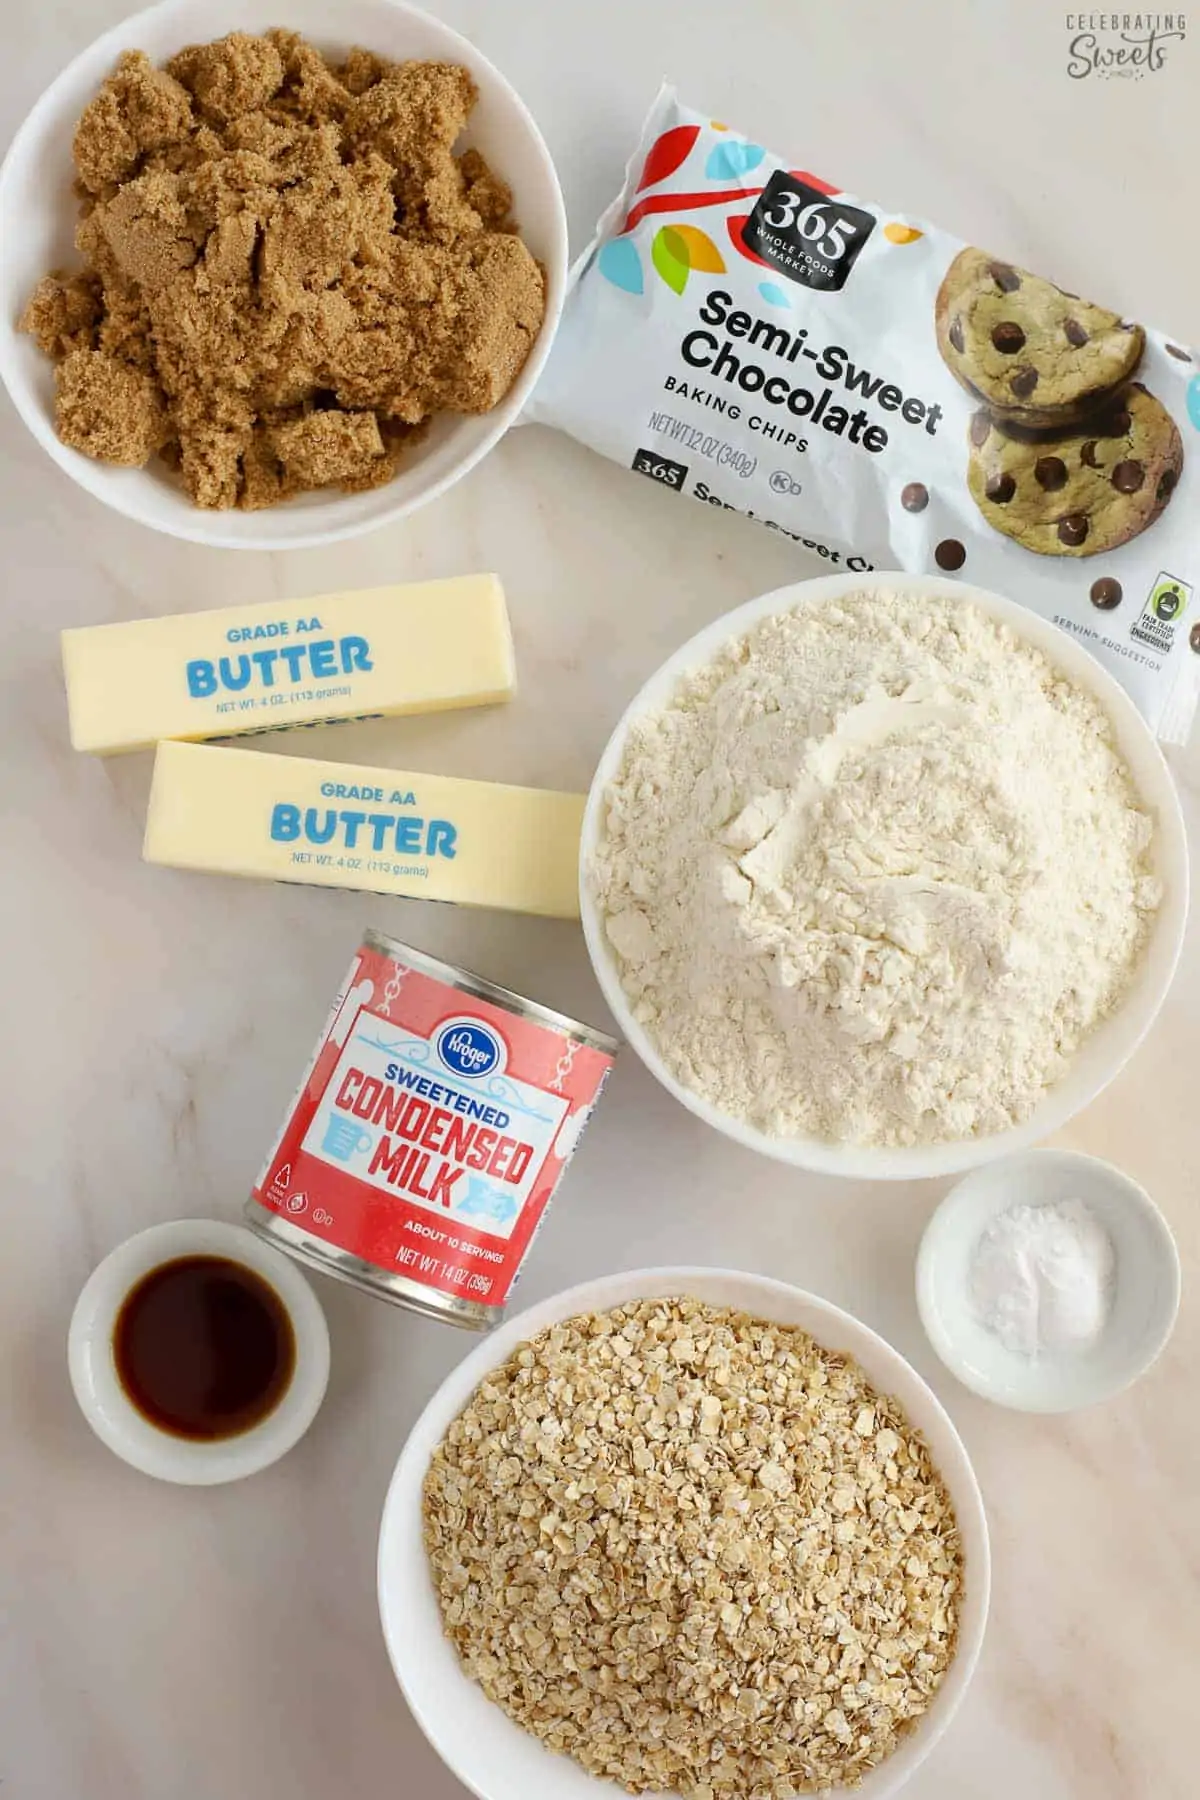 Ingredients for Oatmeal Fudge Bars - Oats, flour, brown sugar, condensed milk, chocolate chips, butter, vanilla.